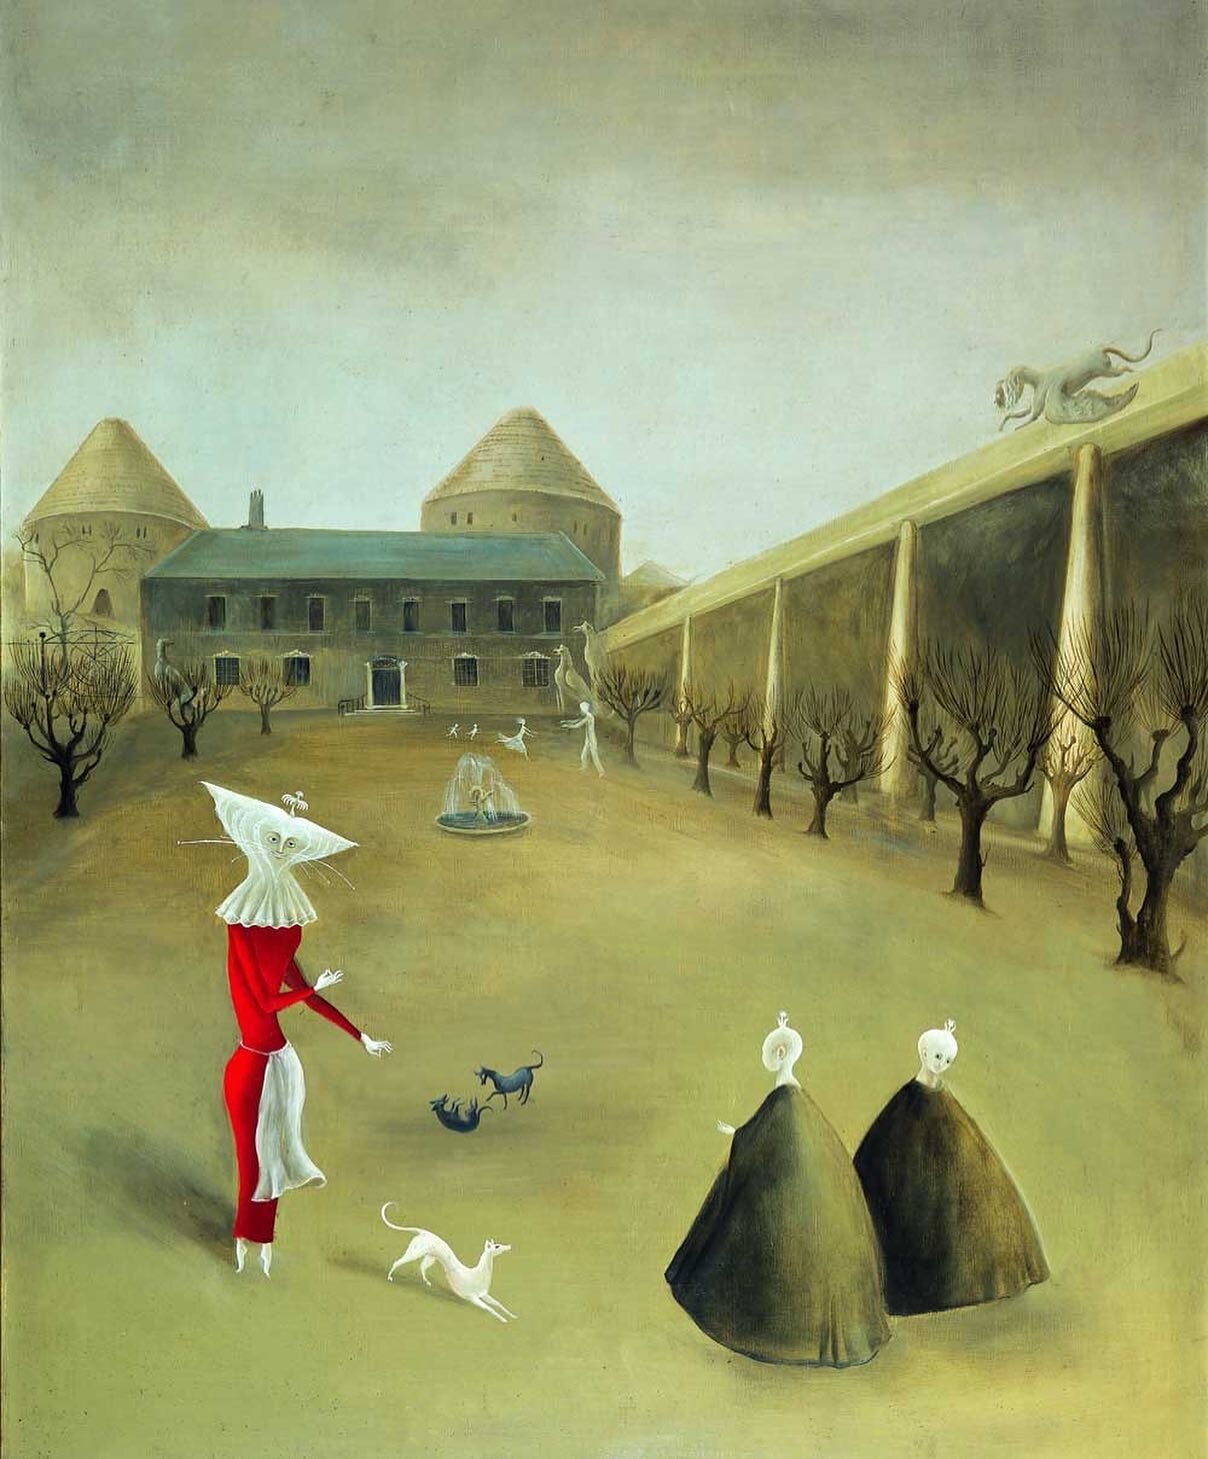 &ldquo;The dream was always running ahead of me.  To catch up, to live for a moment in unison, was the miracle.&rdquo; -Ana&iuml;s Nin / Leonora Carrington, Darvault, 1950.